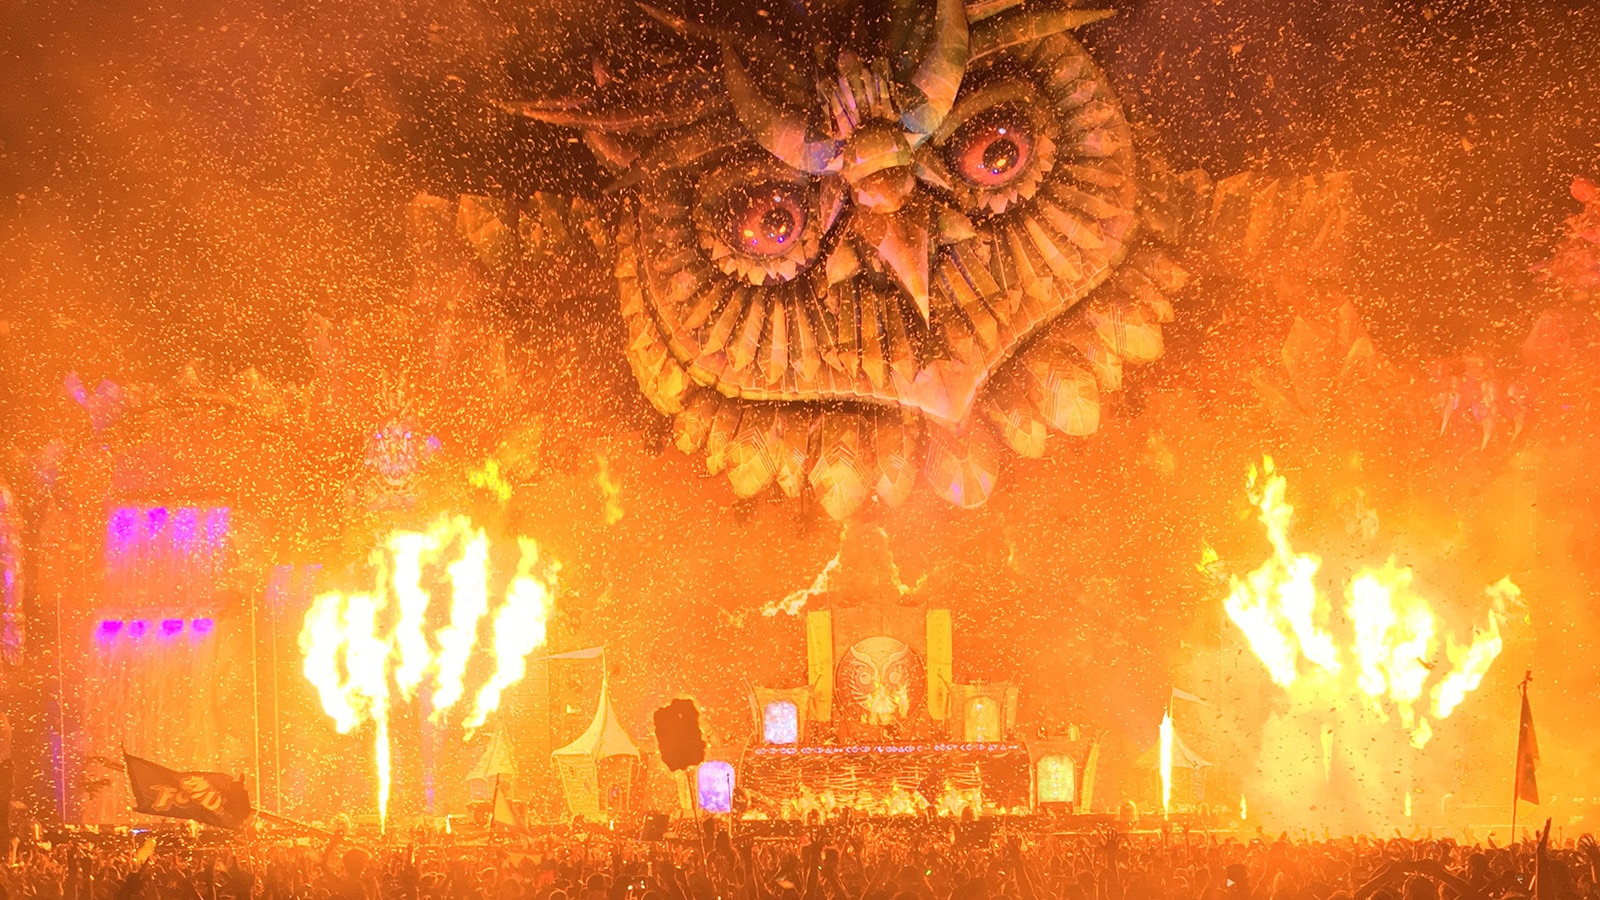 Meyer Sound LEO Wows Crowds at Electric Daisy Carnival Orlando